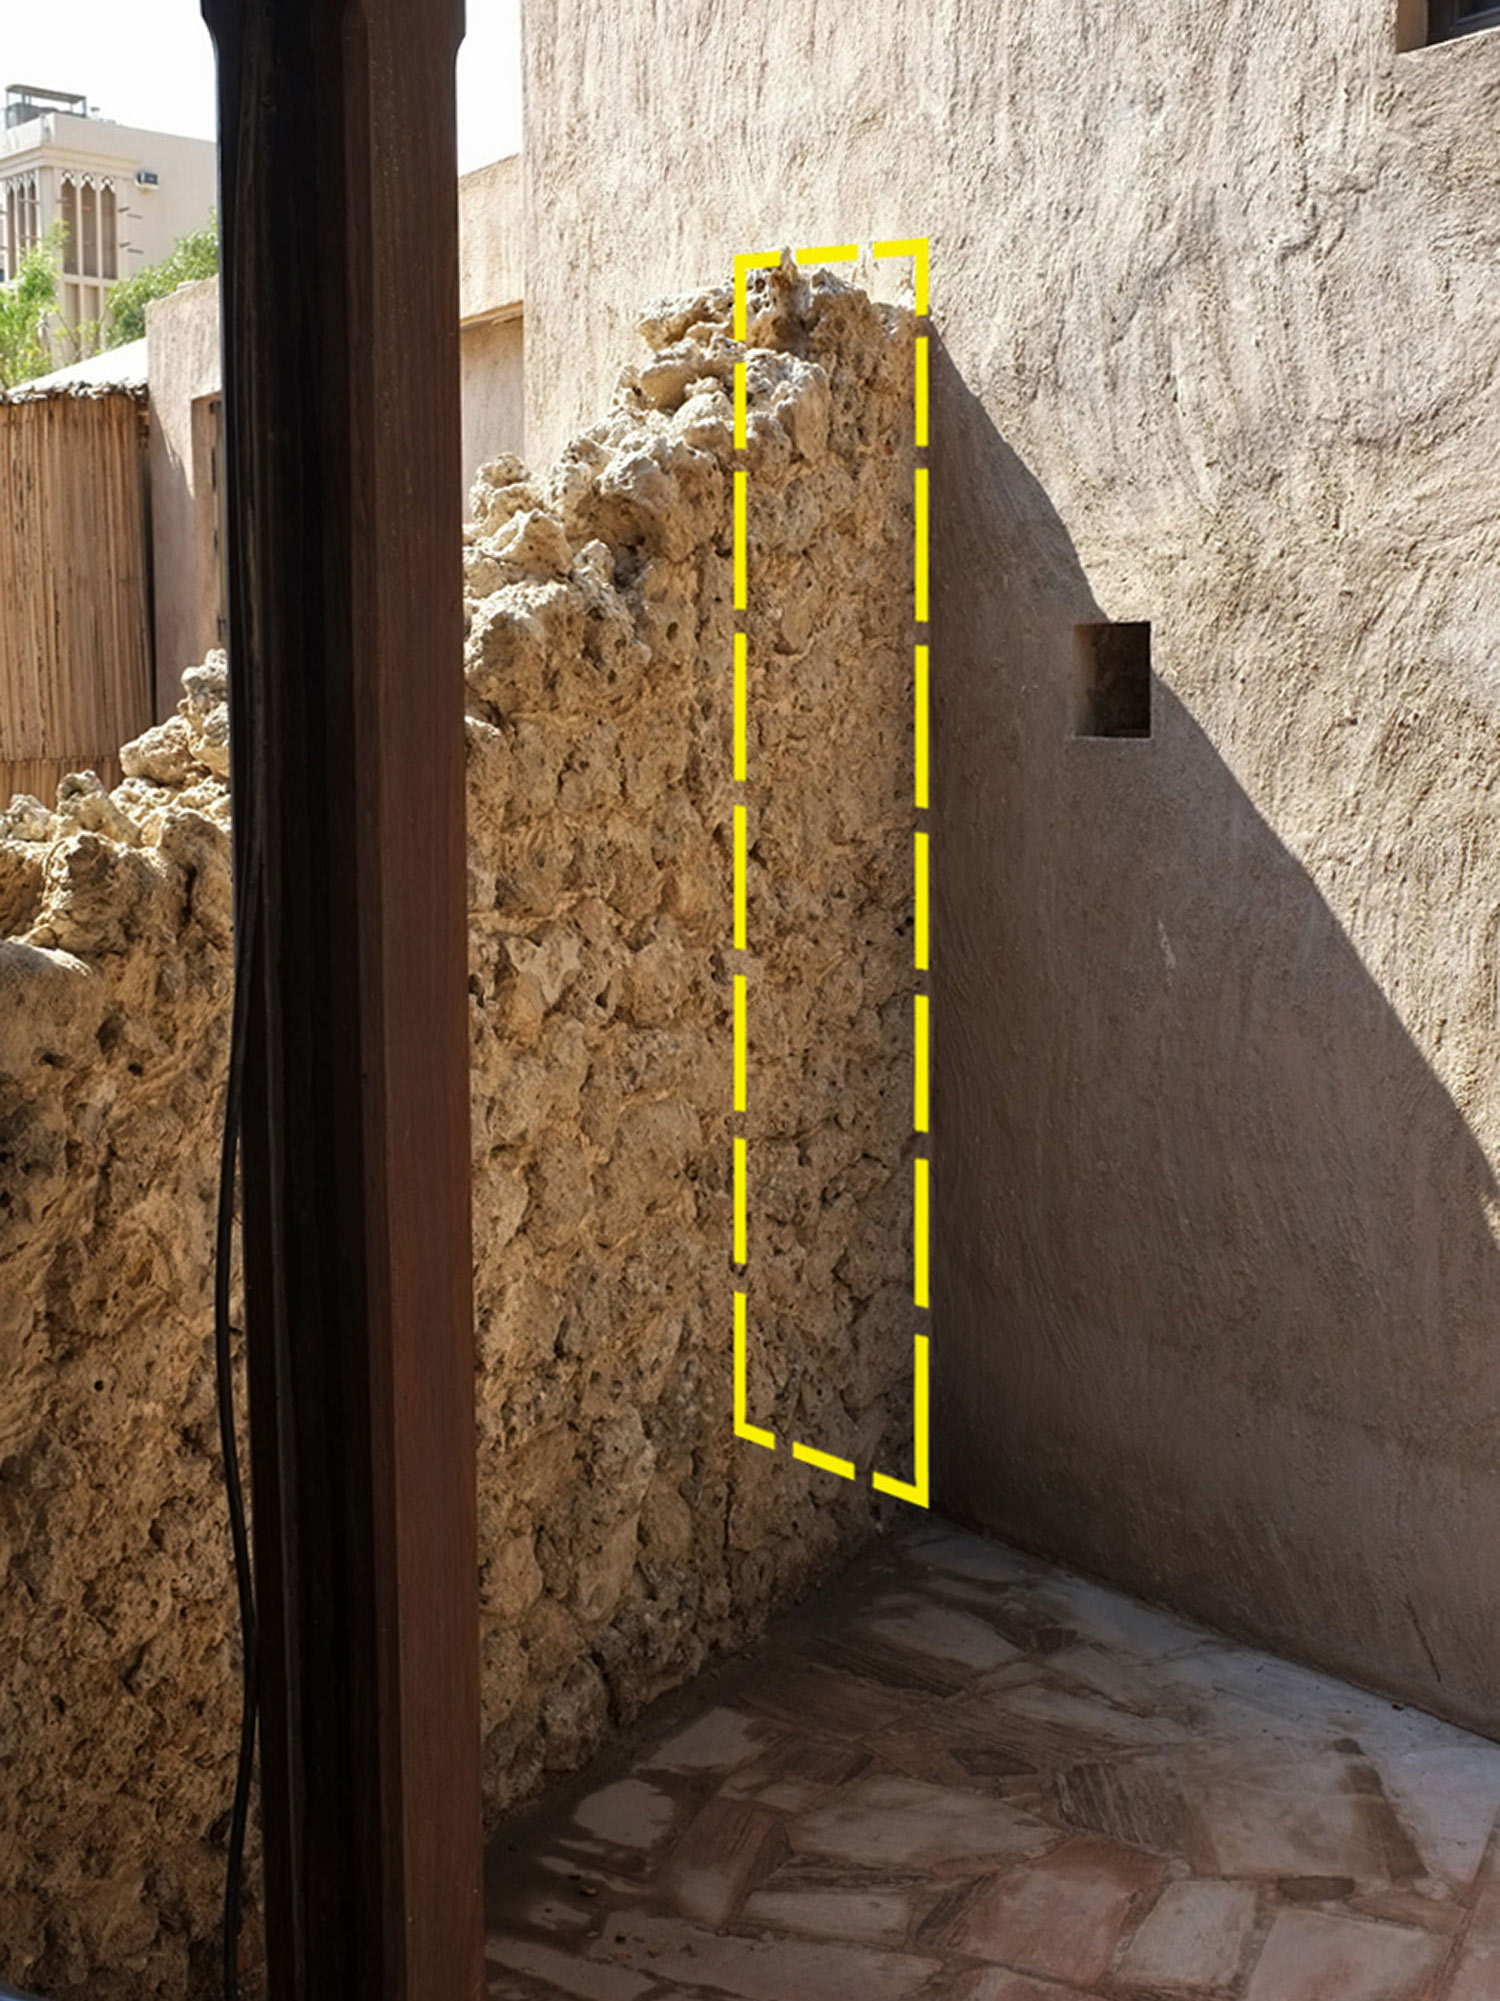  Preserved section of Historic Boundary wall  Al Fahidi Historical Neighbourhood  Highlighted in Yellow are the cross section dimension measuring 250cm (h) x 40cm (w) 